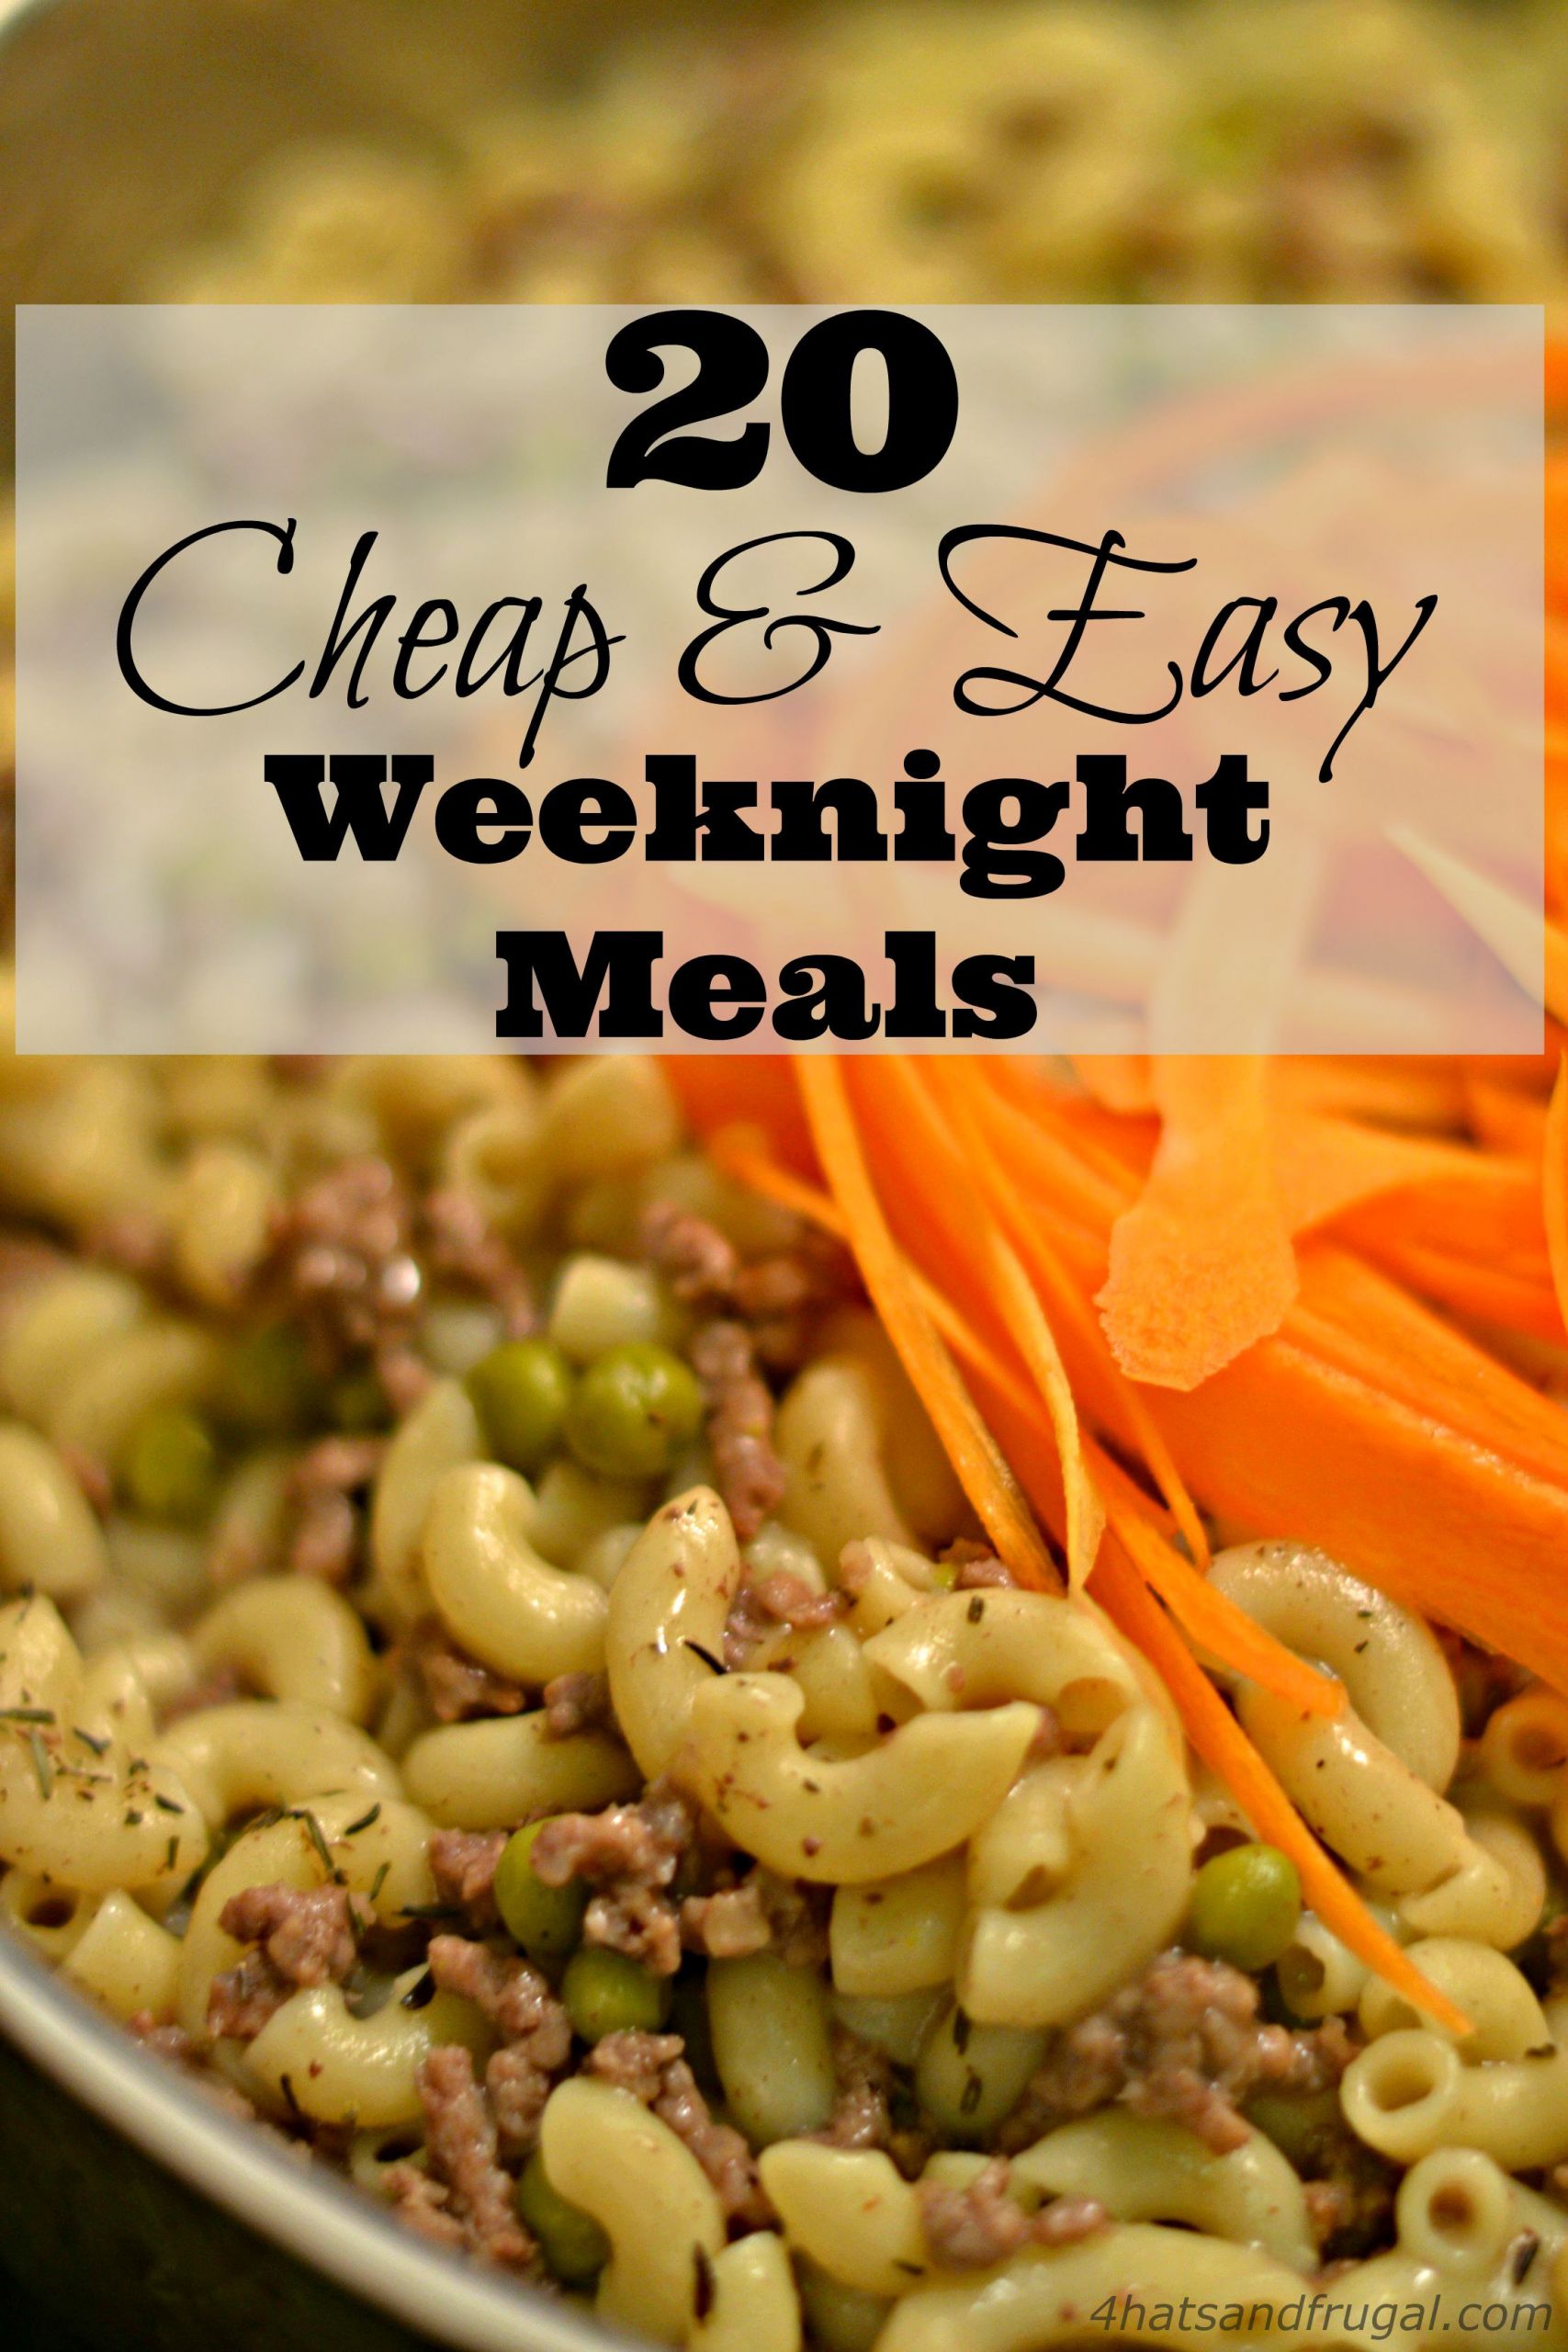 Easy Dinner Recipes For Family Cheap
 20 Cheap & Easy Weeknight Meals 4 Hats and Frugal